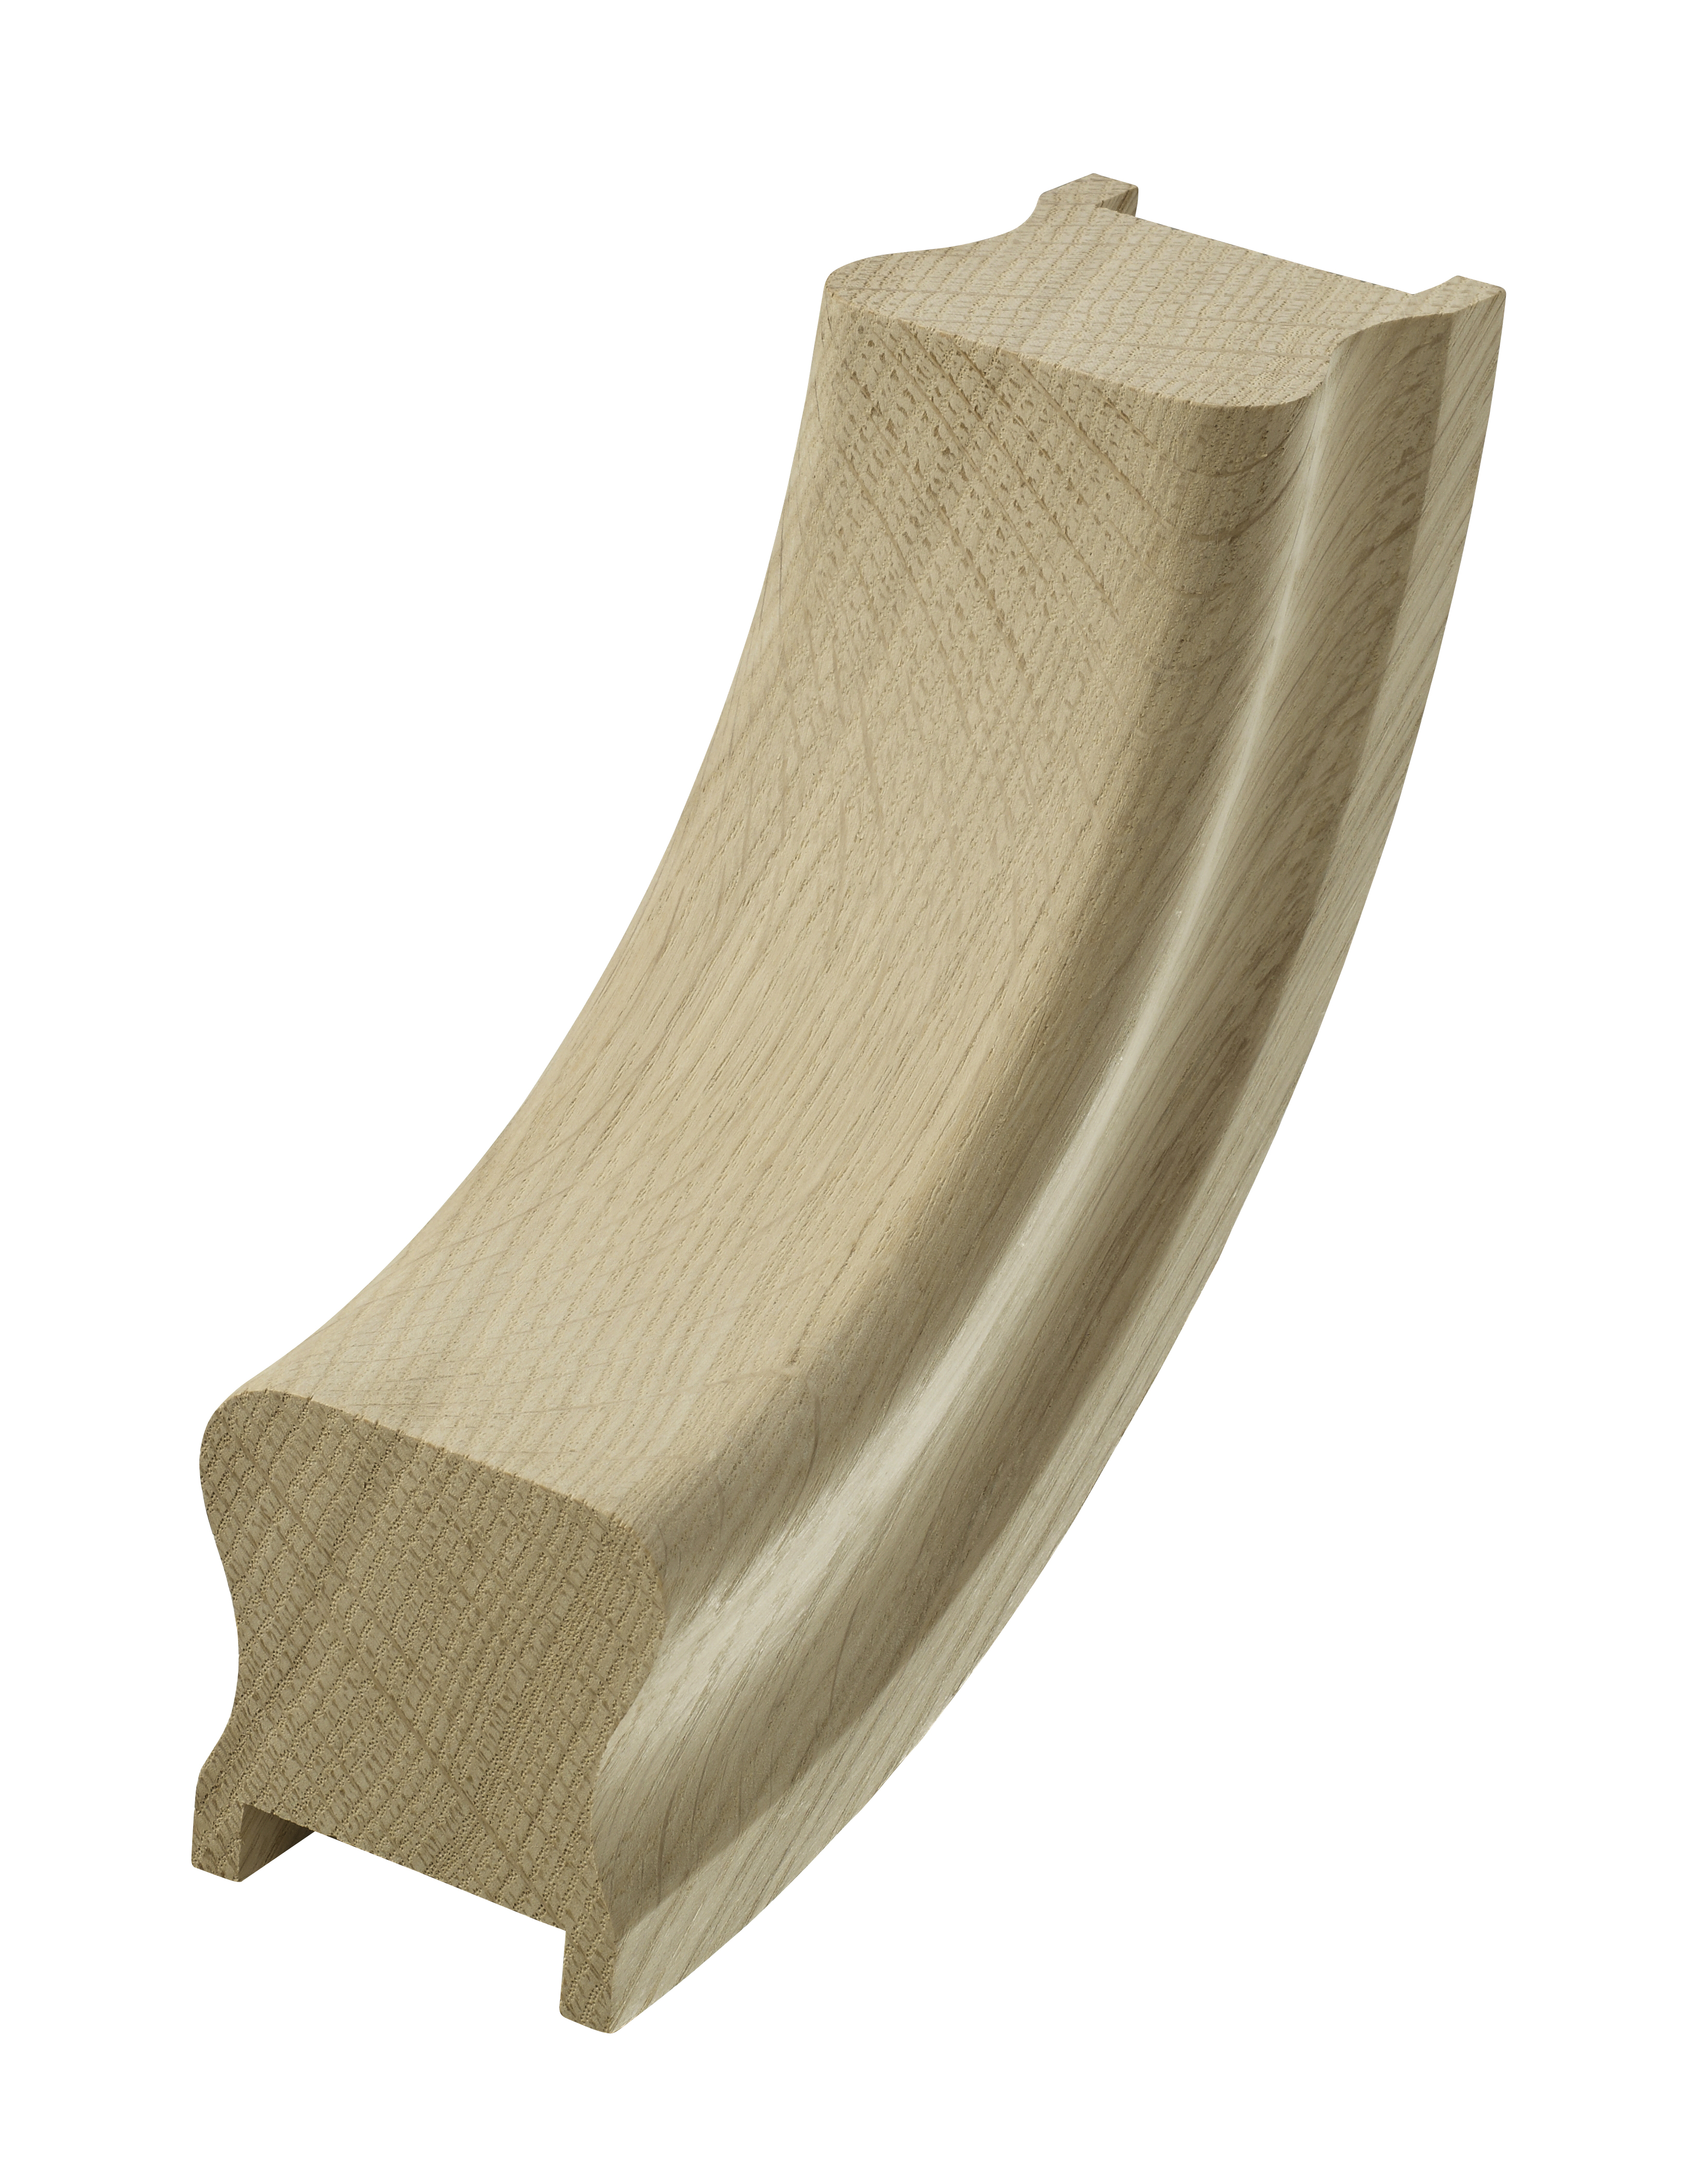 1 Oak HDR Concave Ramp 90 Degee